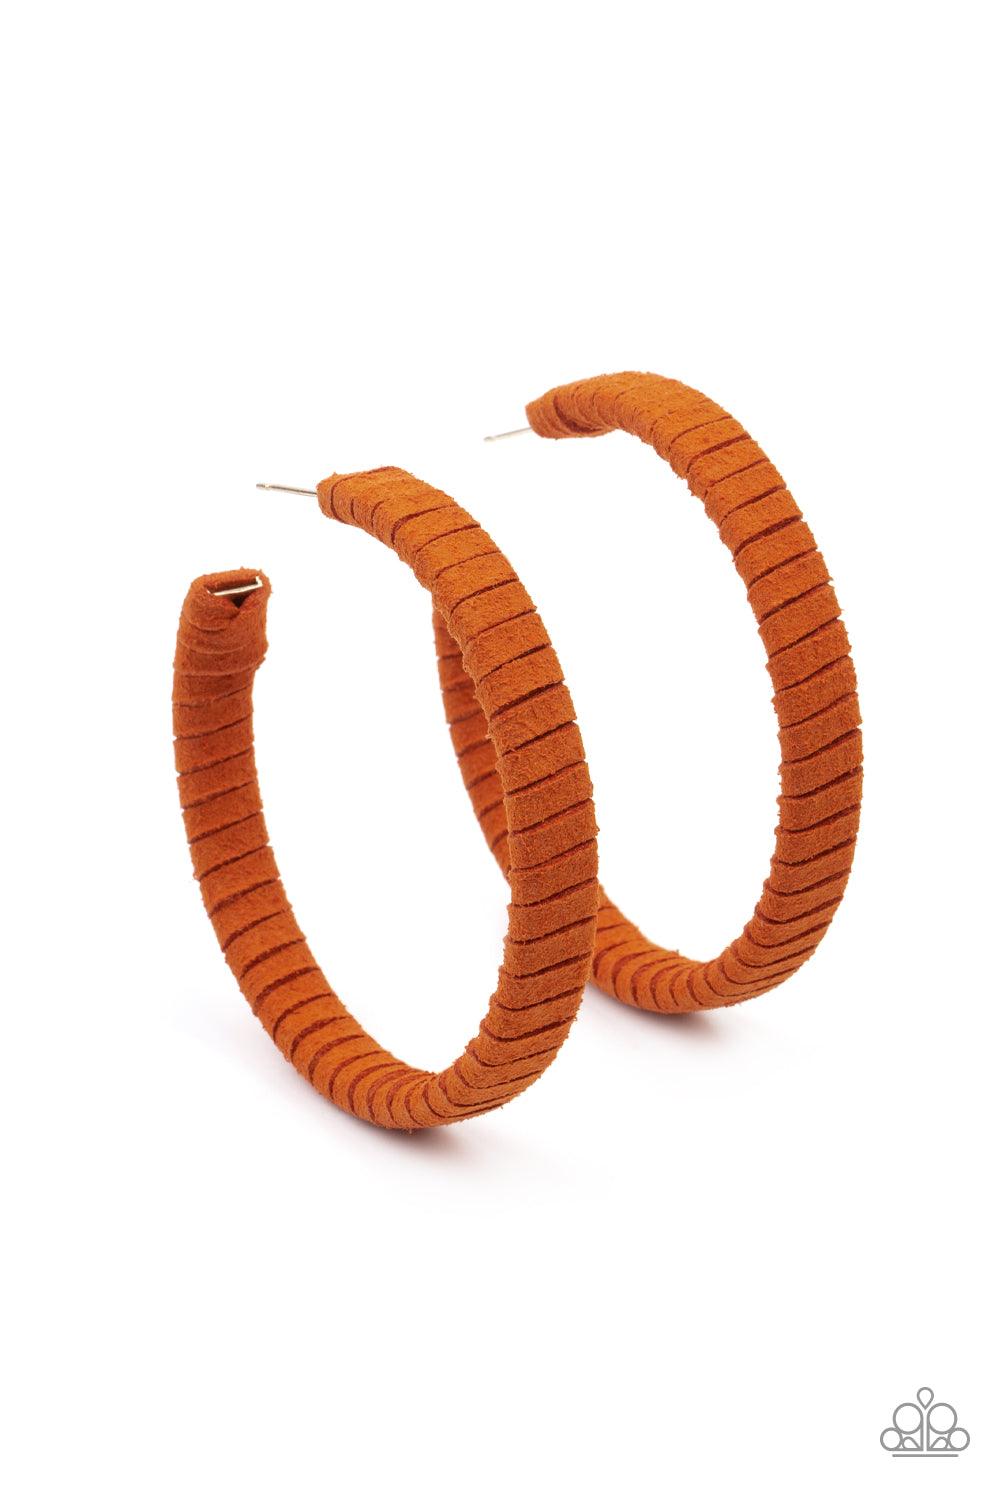 Paparazzi Accessories Suede Parade - Orange Orange suede cording wraps around an oversized hoop, creating an earthy pop of color. Earring attaches to a standard post fitting. Hoop measures approximately 2 1/4" in diameter. Sold as one pair of hoop earring